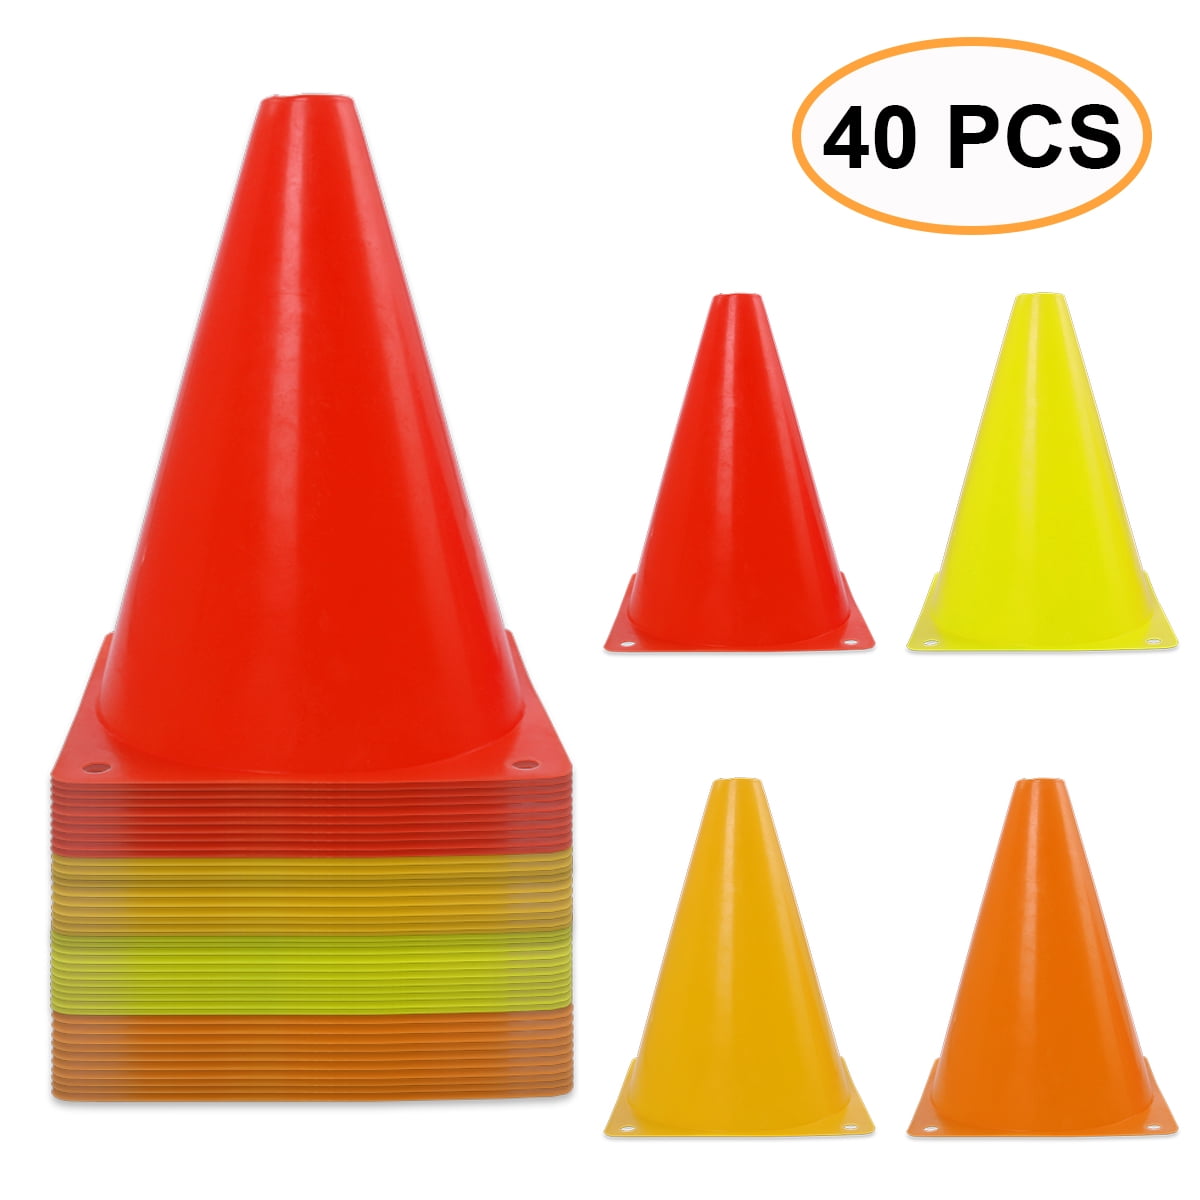 Mirepty 7 inch Plastic Traffic Cones Sport Training Agility Marker Cone for Soccer, Skating, Football, Basketball, Indoor and Outdoor Games